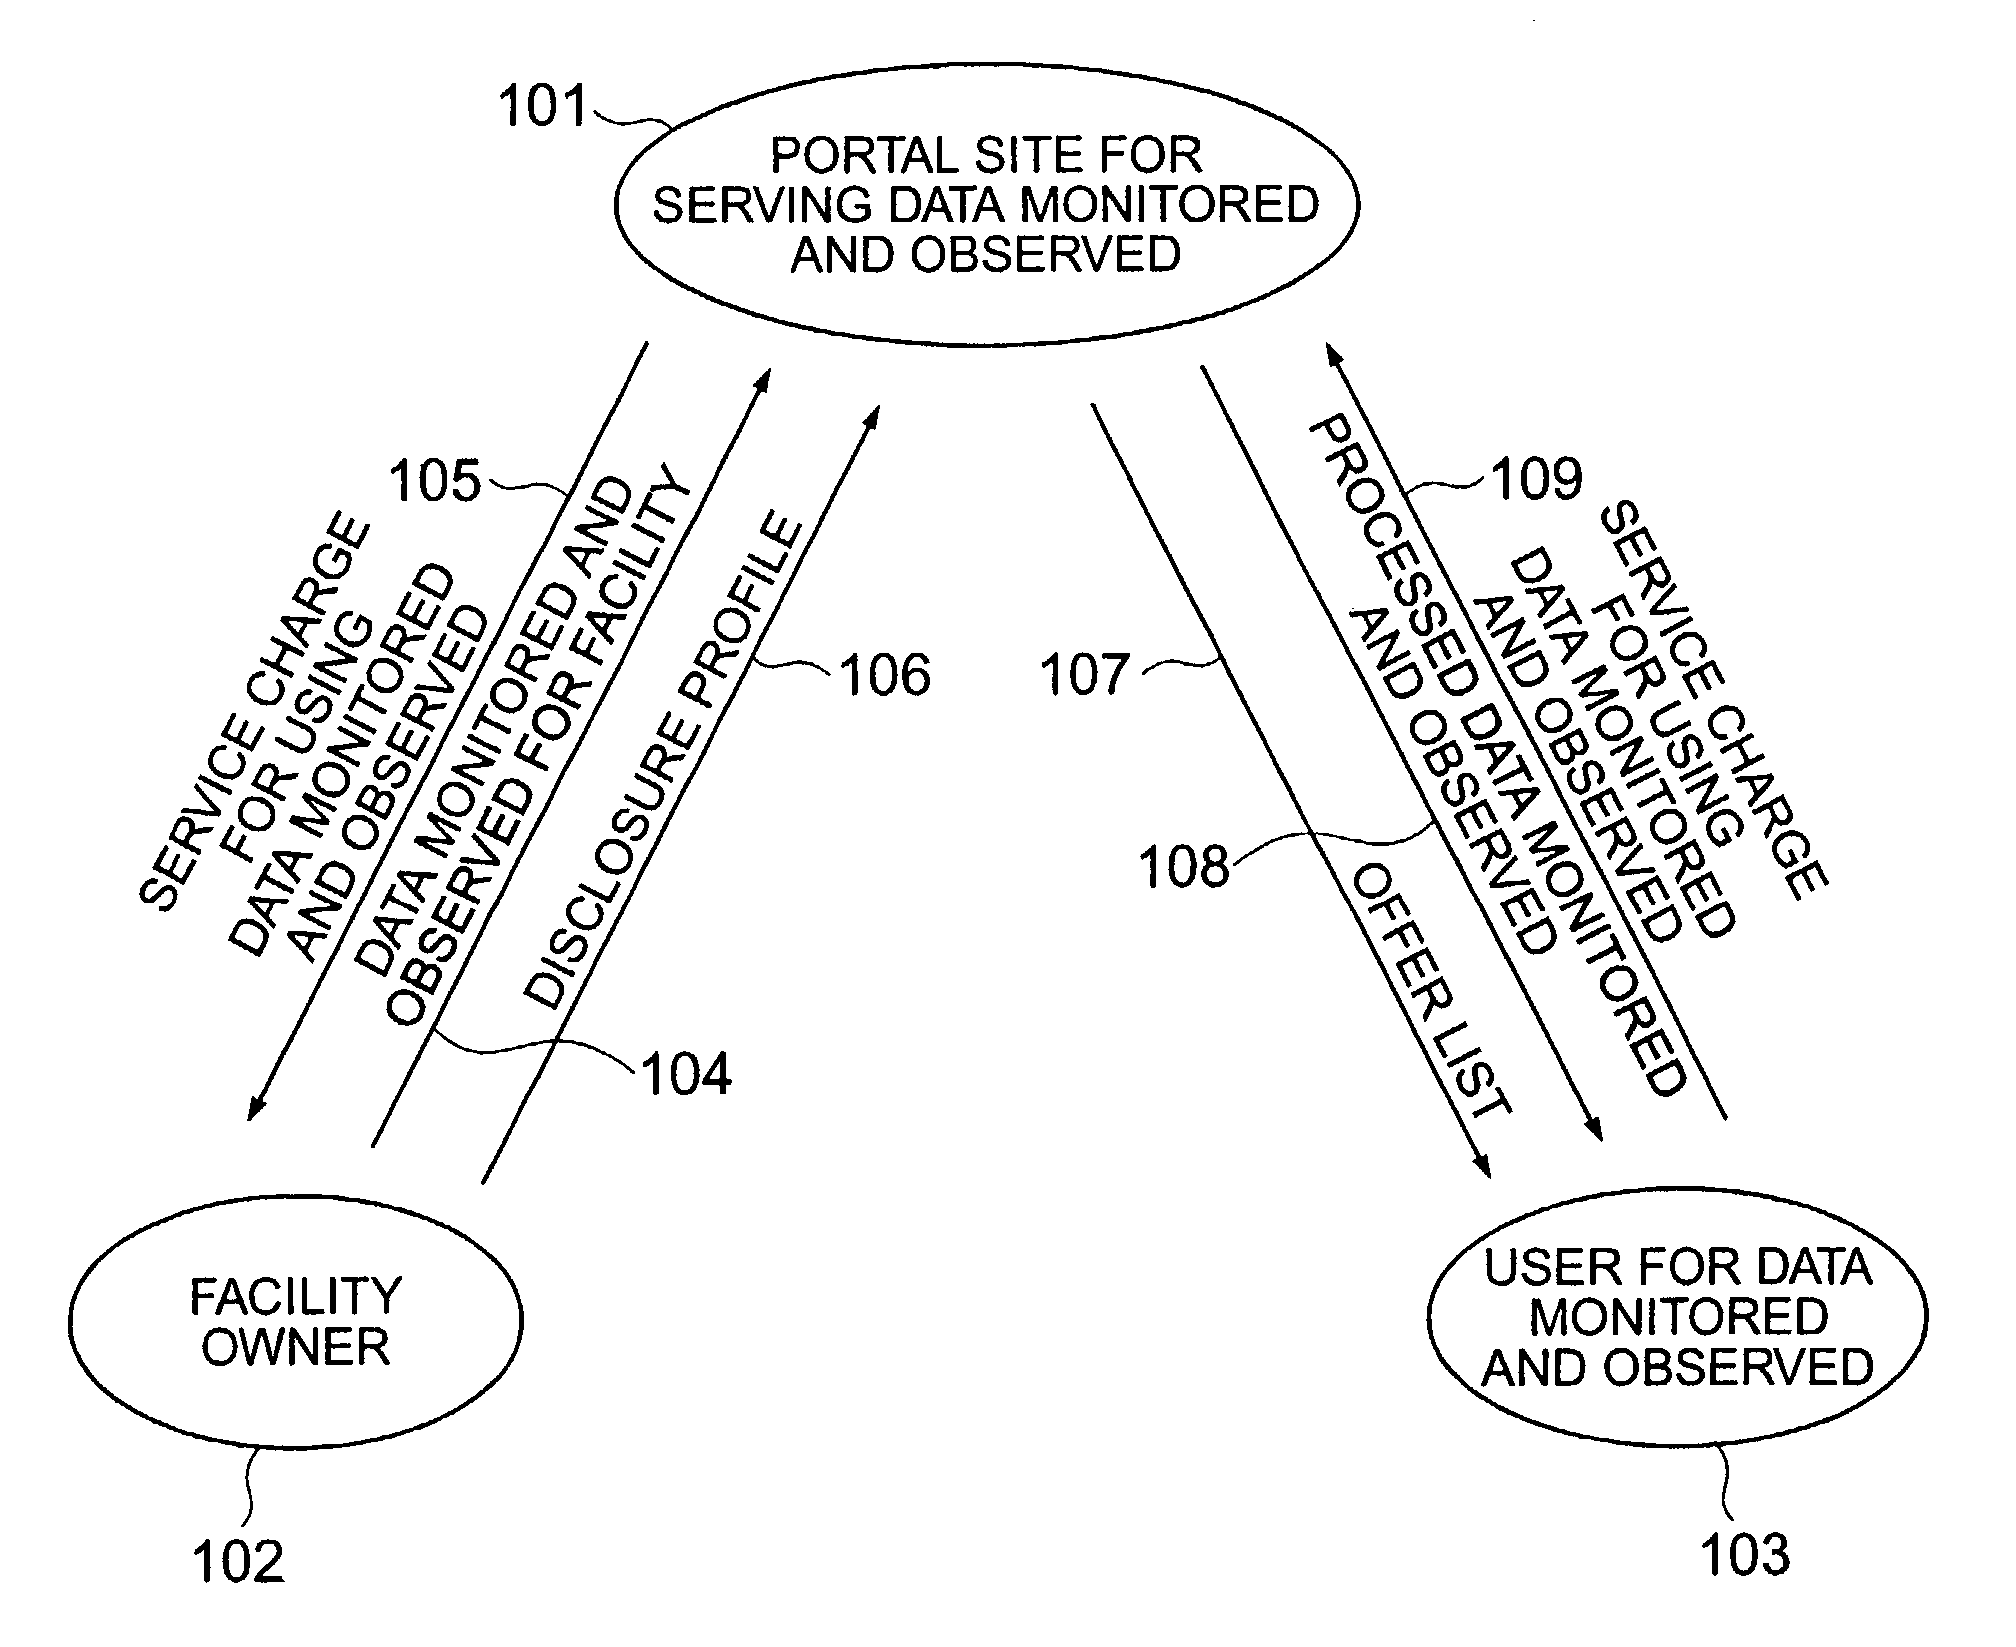 Portal site for serving data monitored and observed and method of using data monitored and observed